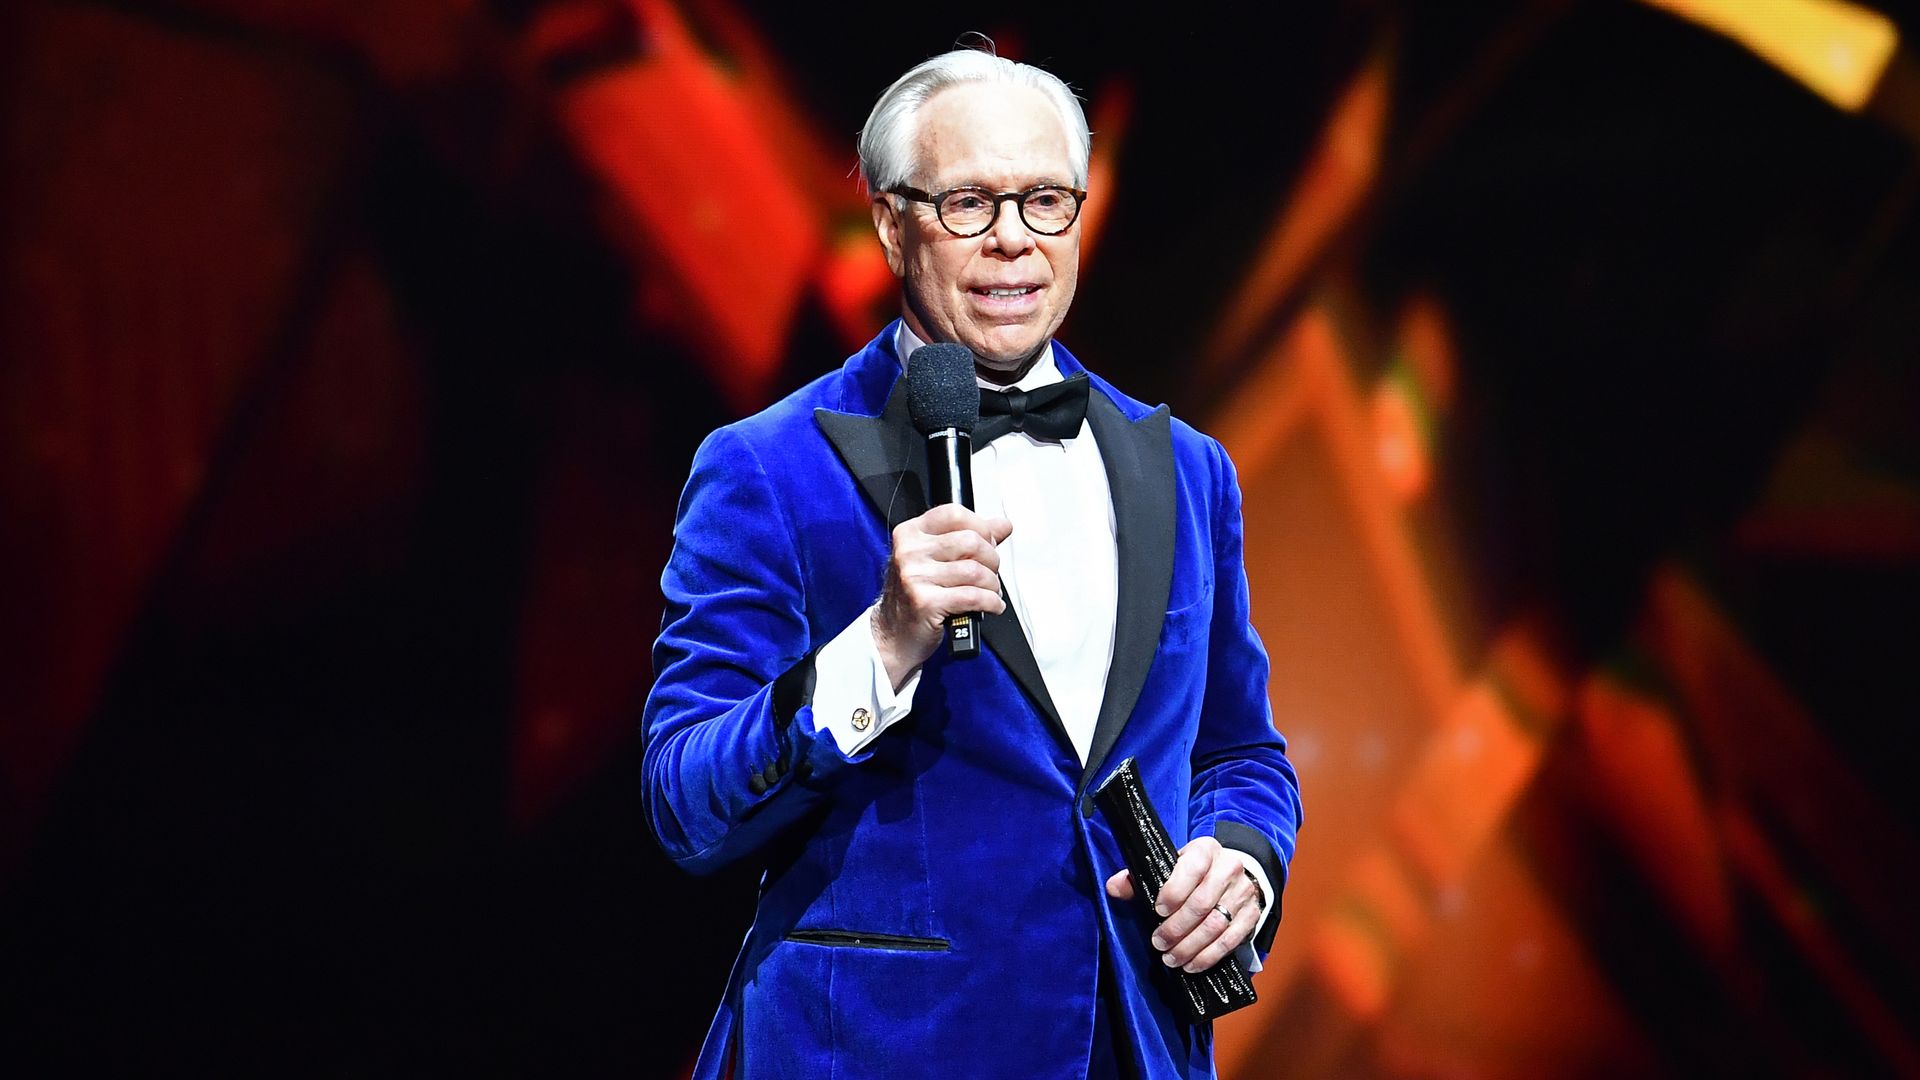 Tommy Hilfiger stood on stage smiling with a mic in hand